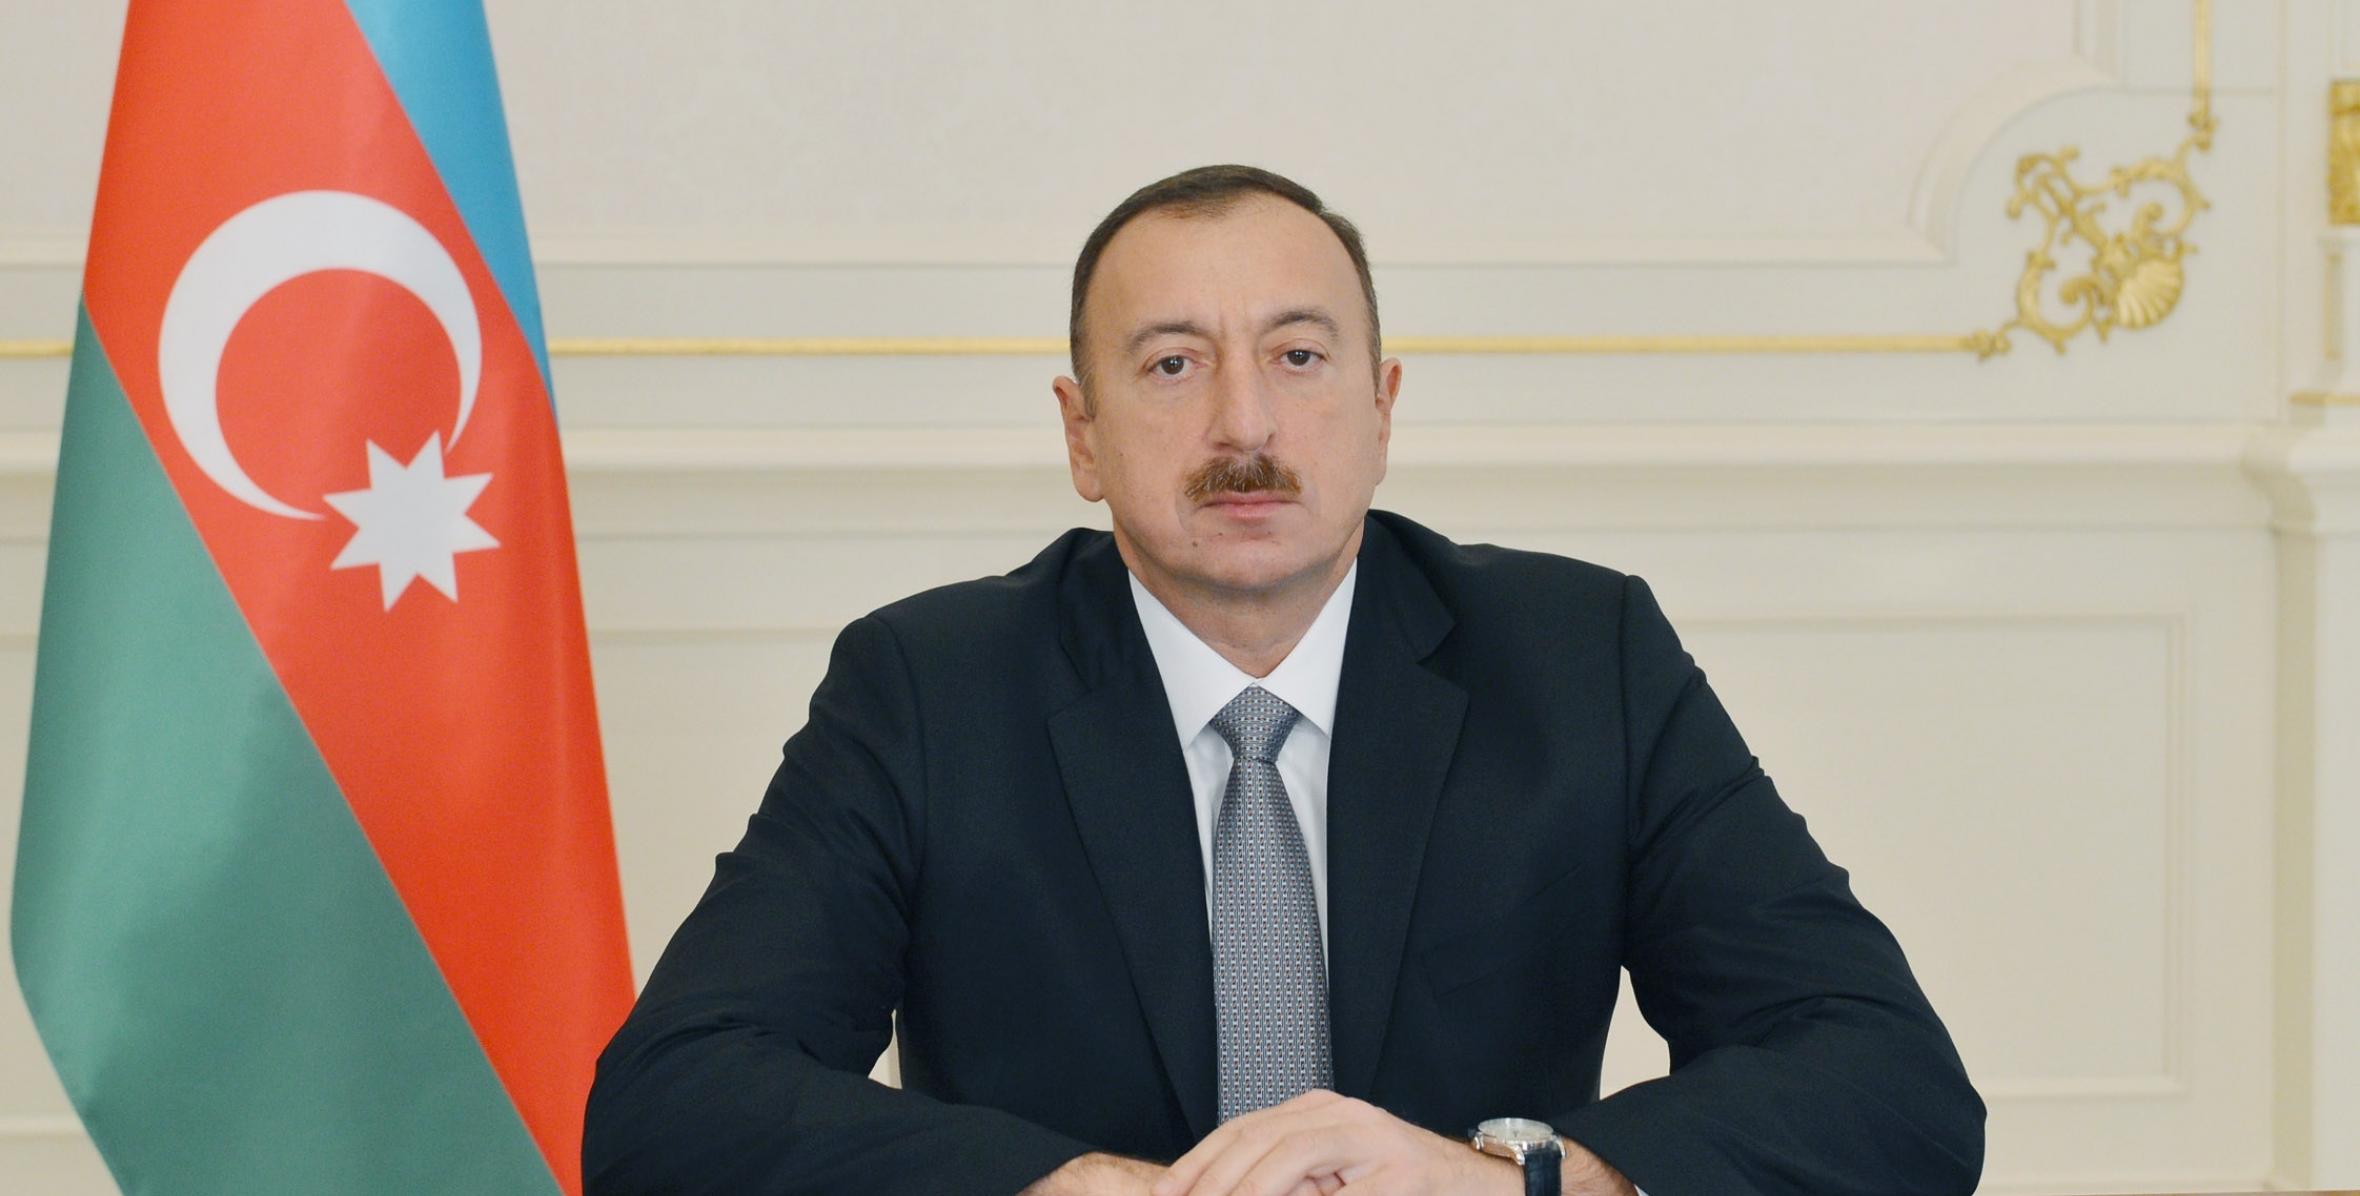 Ilham Aliyev’s congratulations to the Azerbaijani people on the occasion of the Day of Solidarity of World Azerbaijanis and the New Year